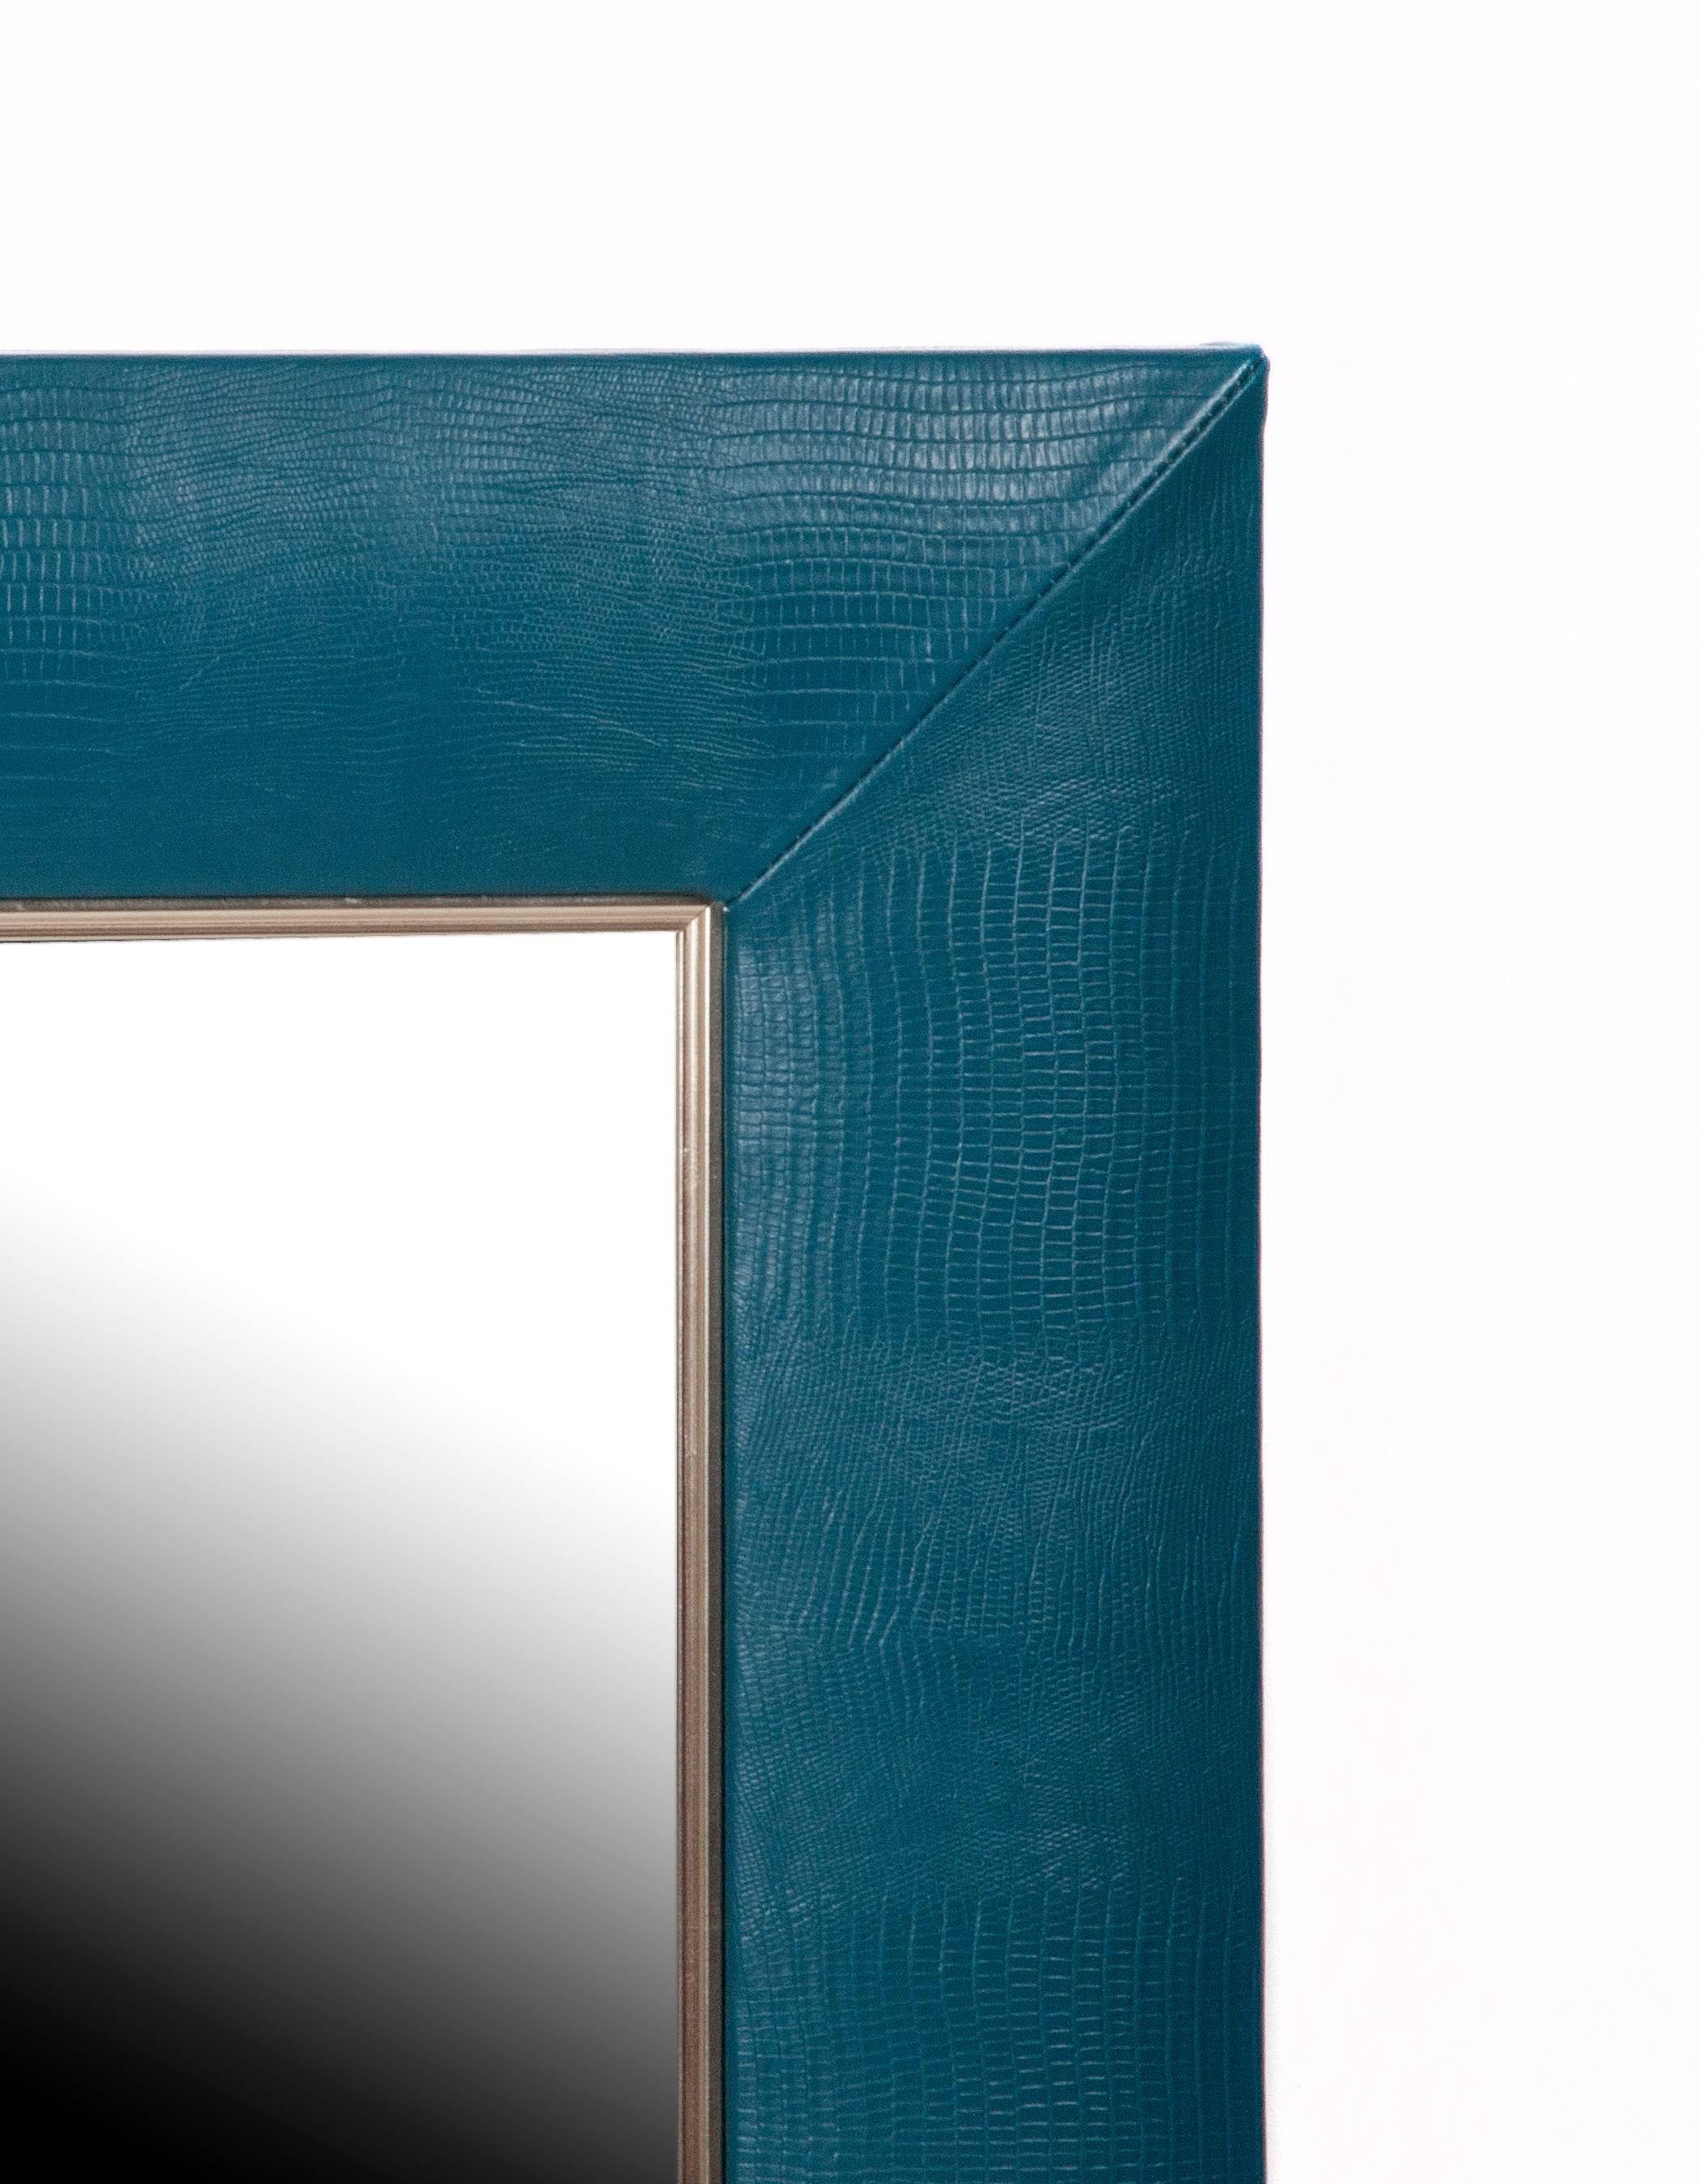 Lizard embossed Italian leather

1 ¼” bevelled mirror
4” wide leather frame
handstitched corners
Measurements including frame: 30” W x 36” H x 1” D

For custom sizes request a quote or call our office to speak to a